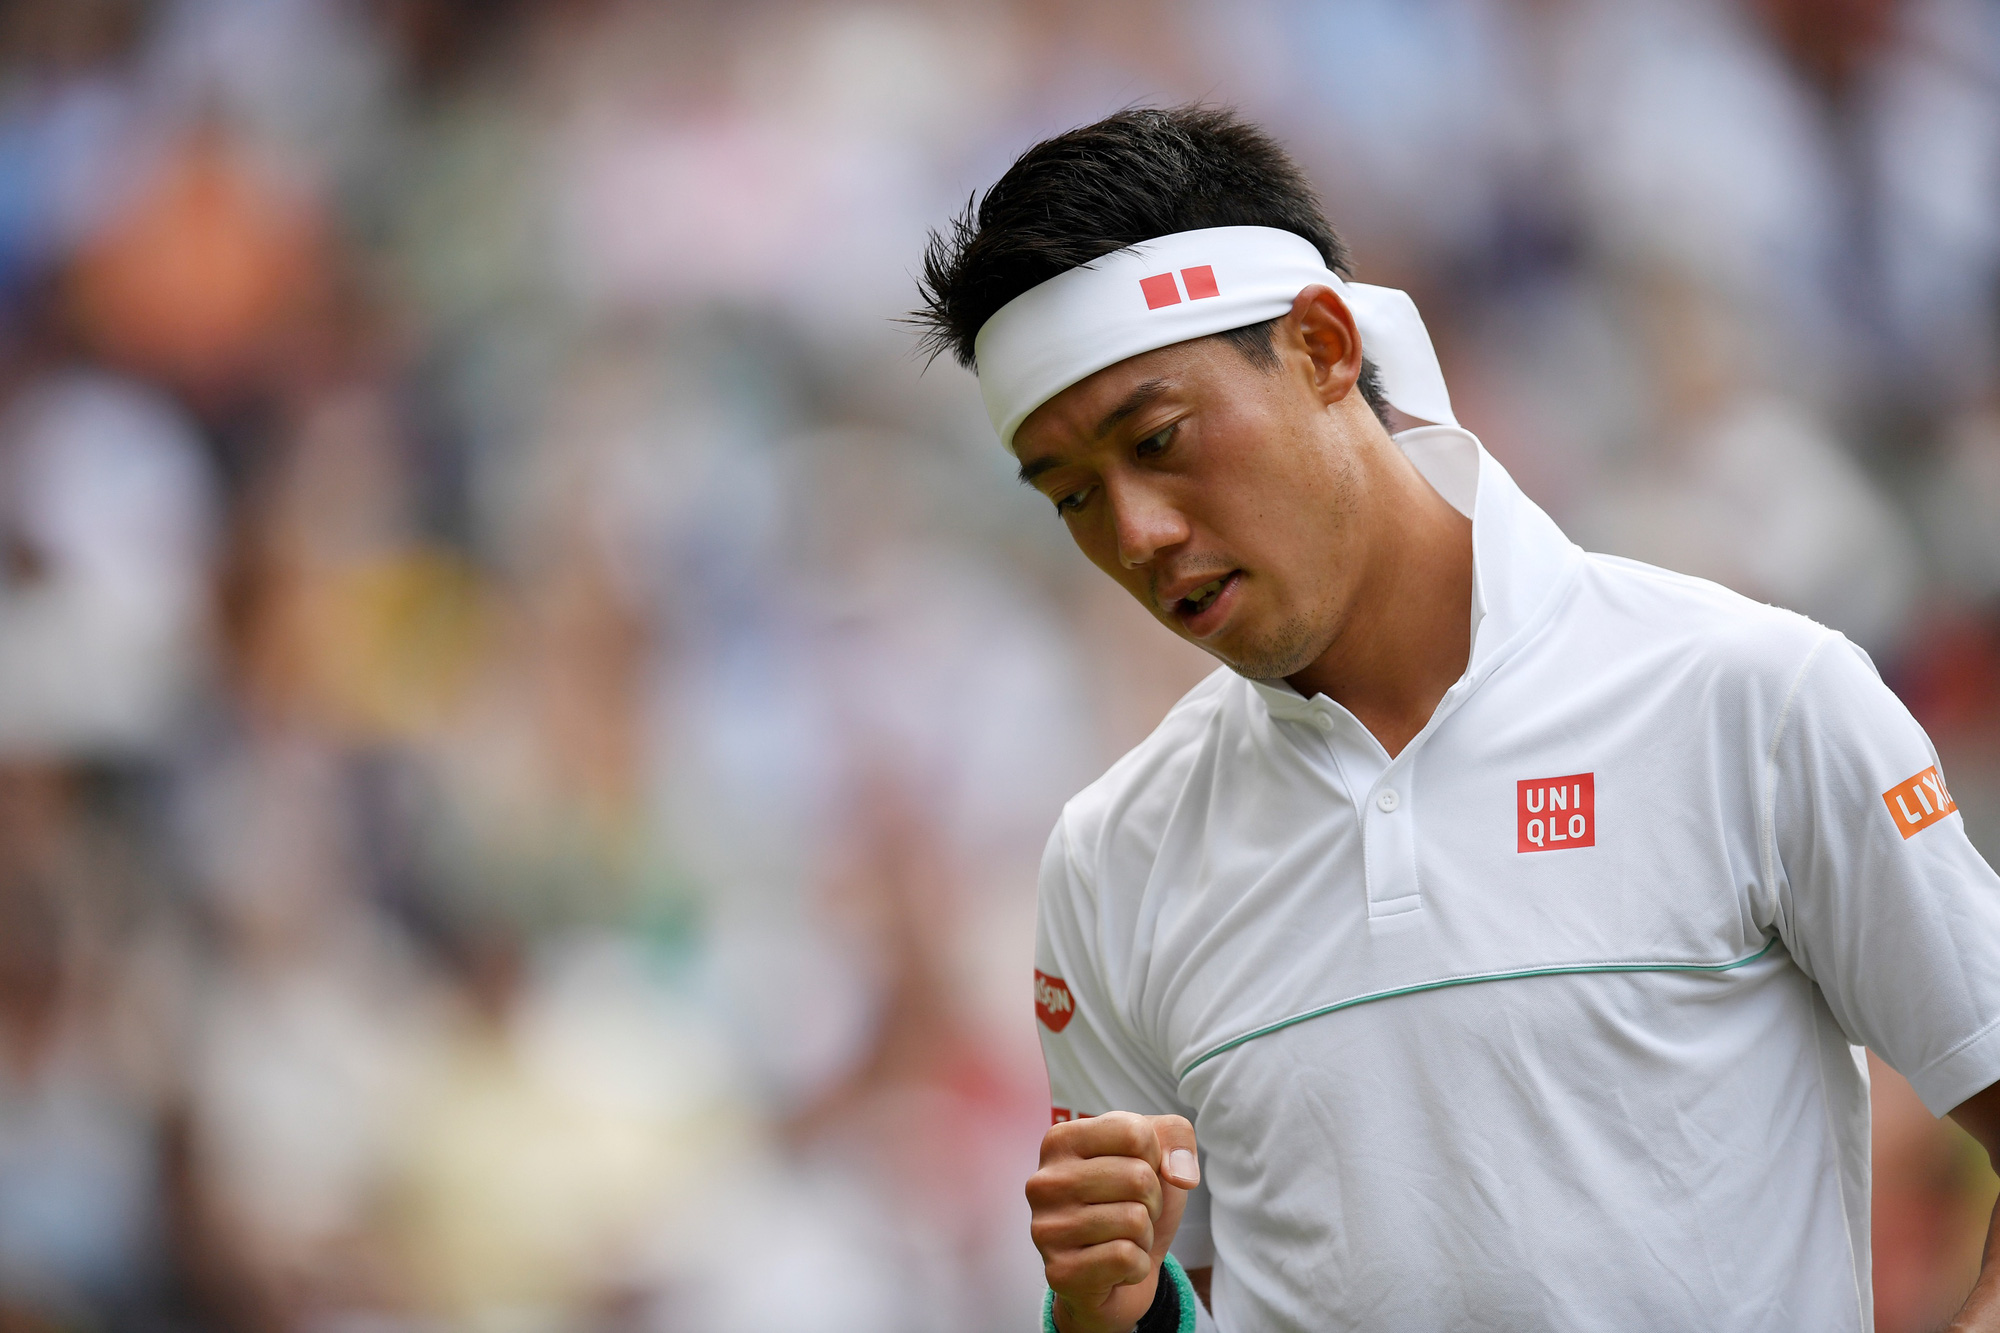 Uniqlo Outfits Roger Federer and Kei Nishikori for the 2019 French Open